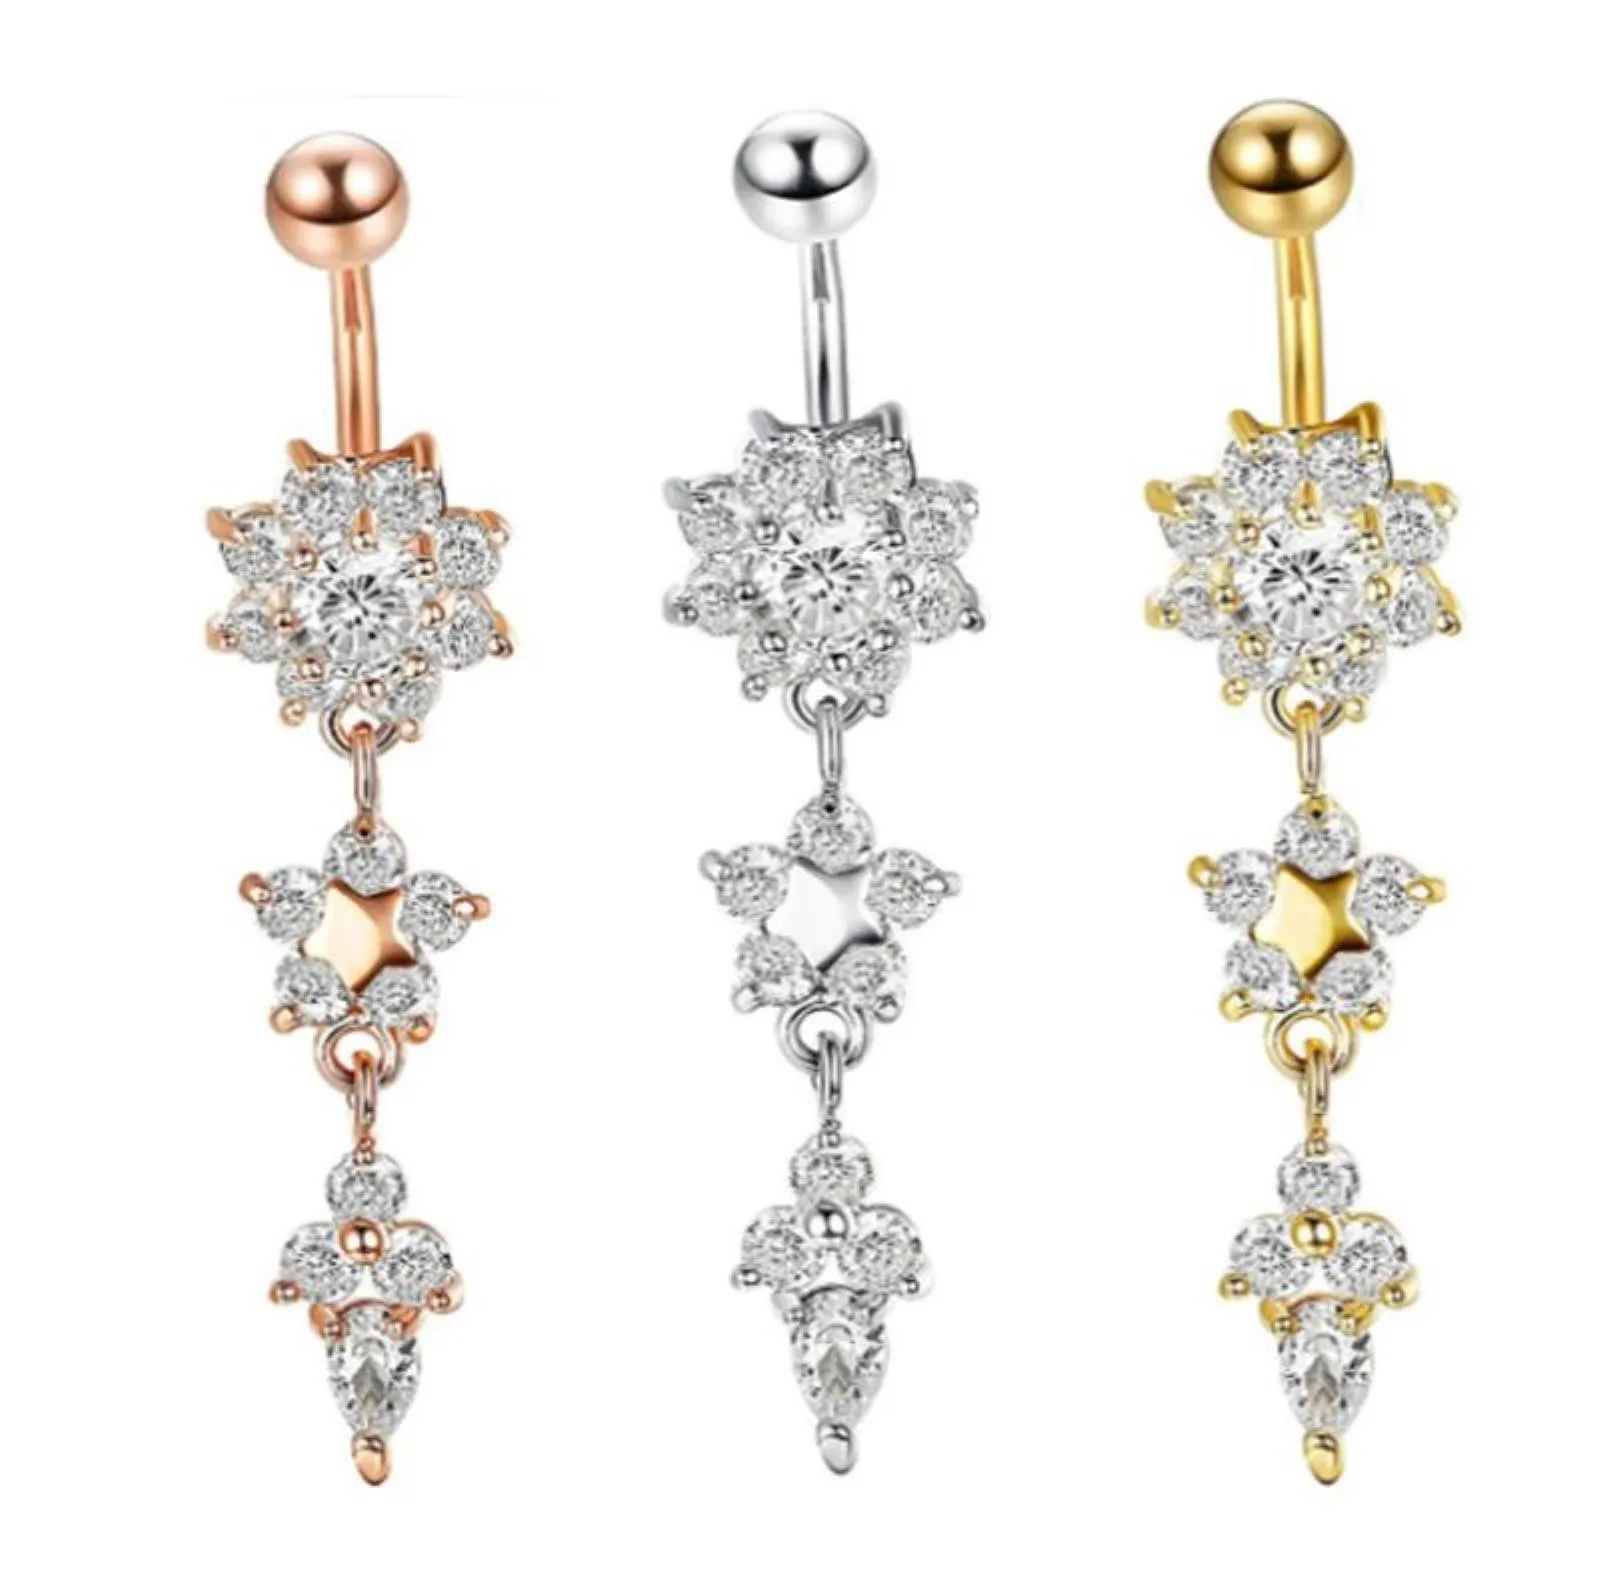 Sexy Dangle Belly Bars Belly Button Rings Belly Piercing Cz Crystal Flower Body Jewelry Navel Piercing Rings Drop Shipping Mya30